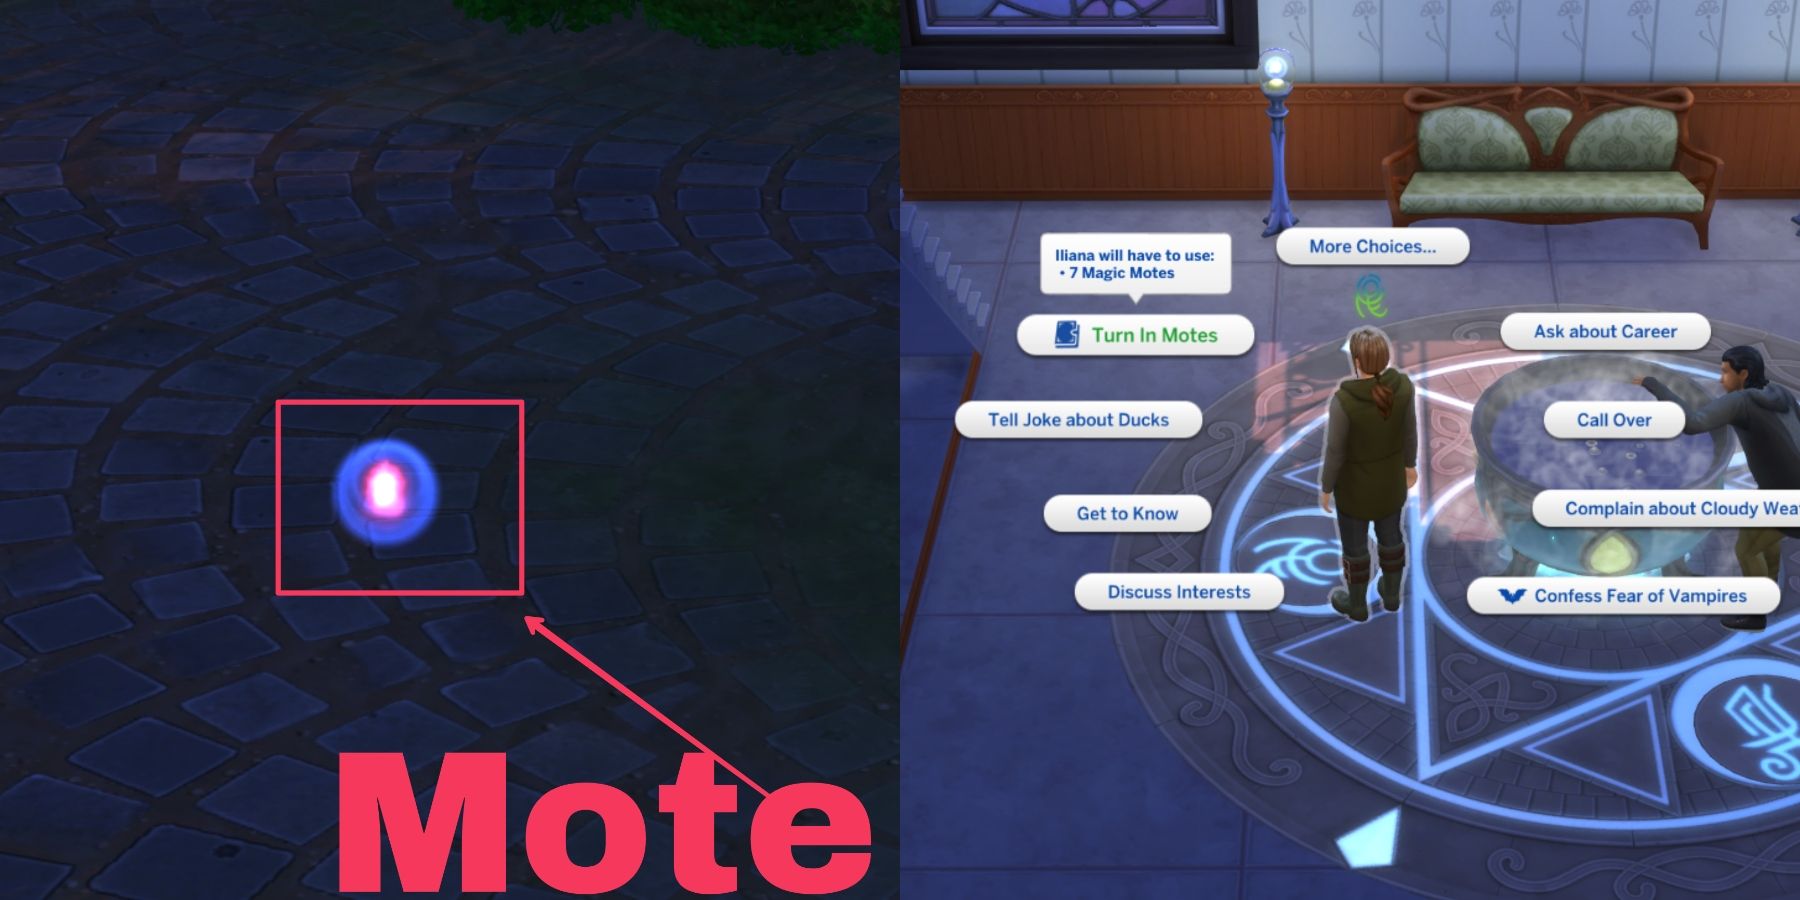 magical motes in the sims 4